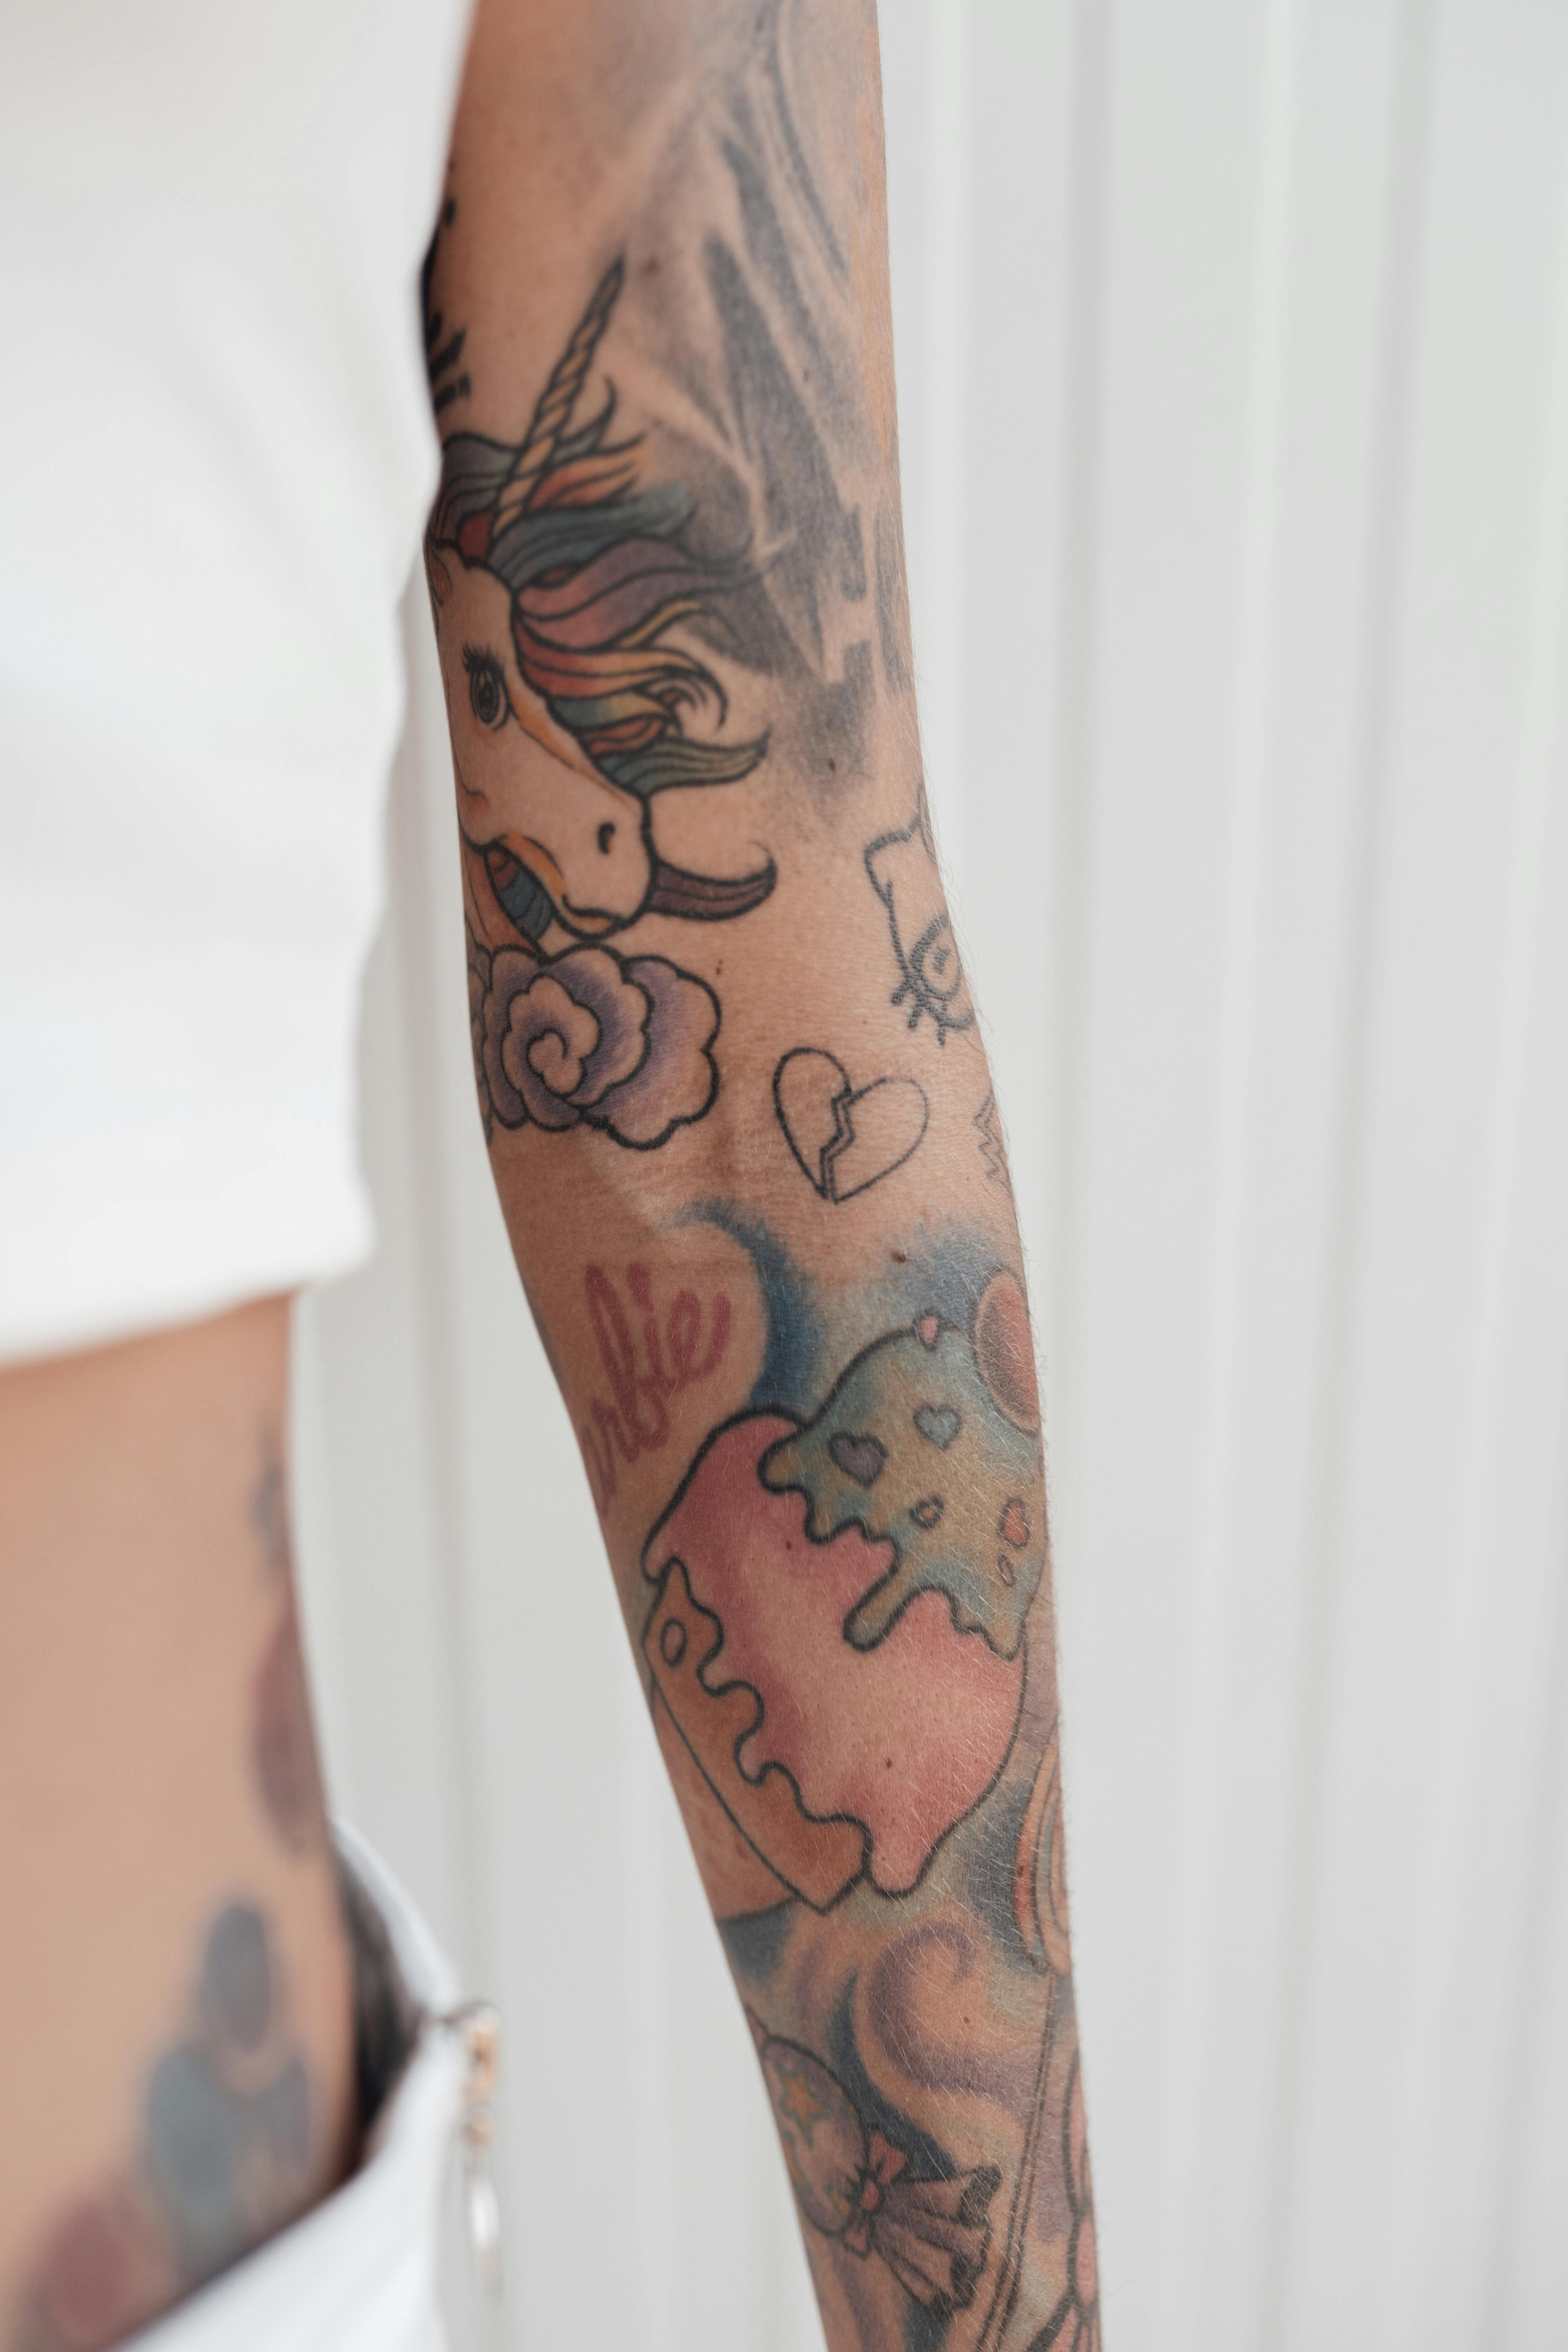 85 Mesmerizing Patchwork Tattoo Designs to get inked this season